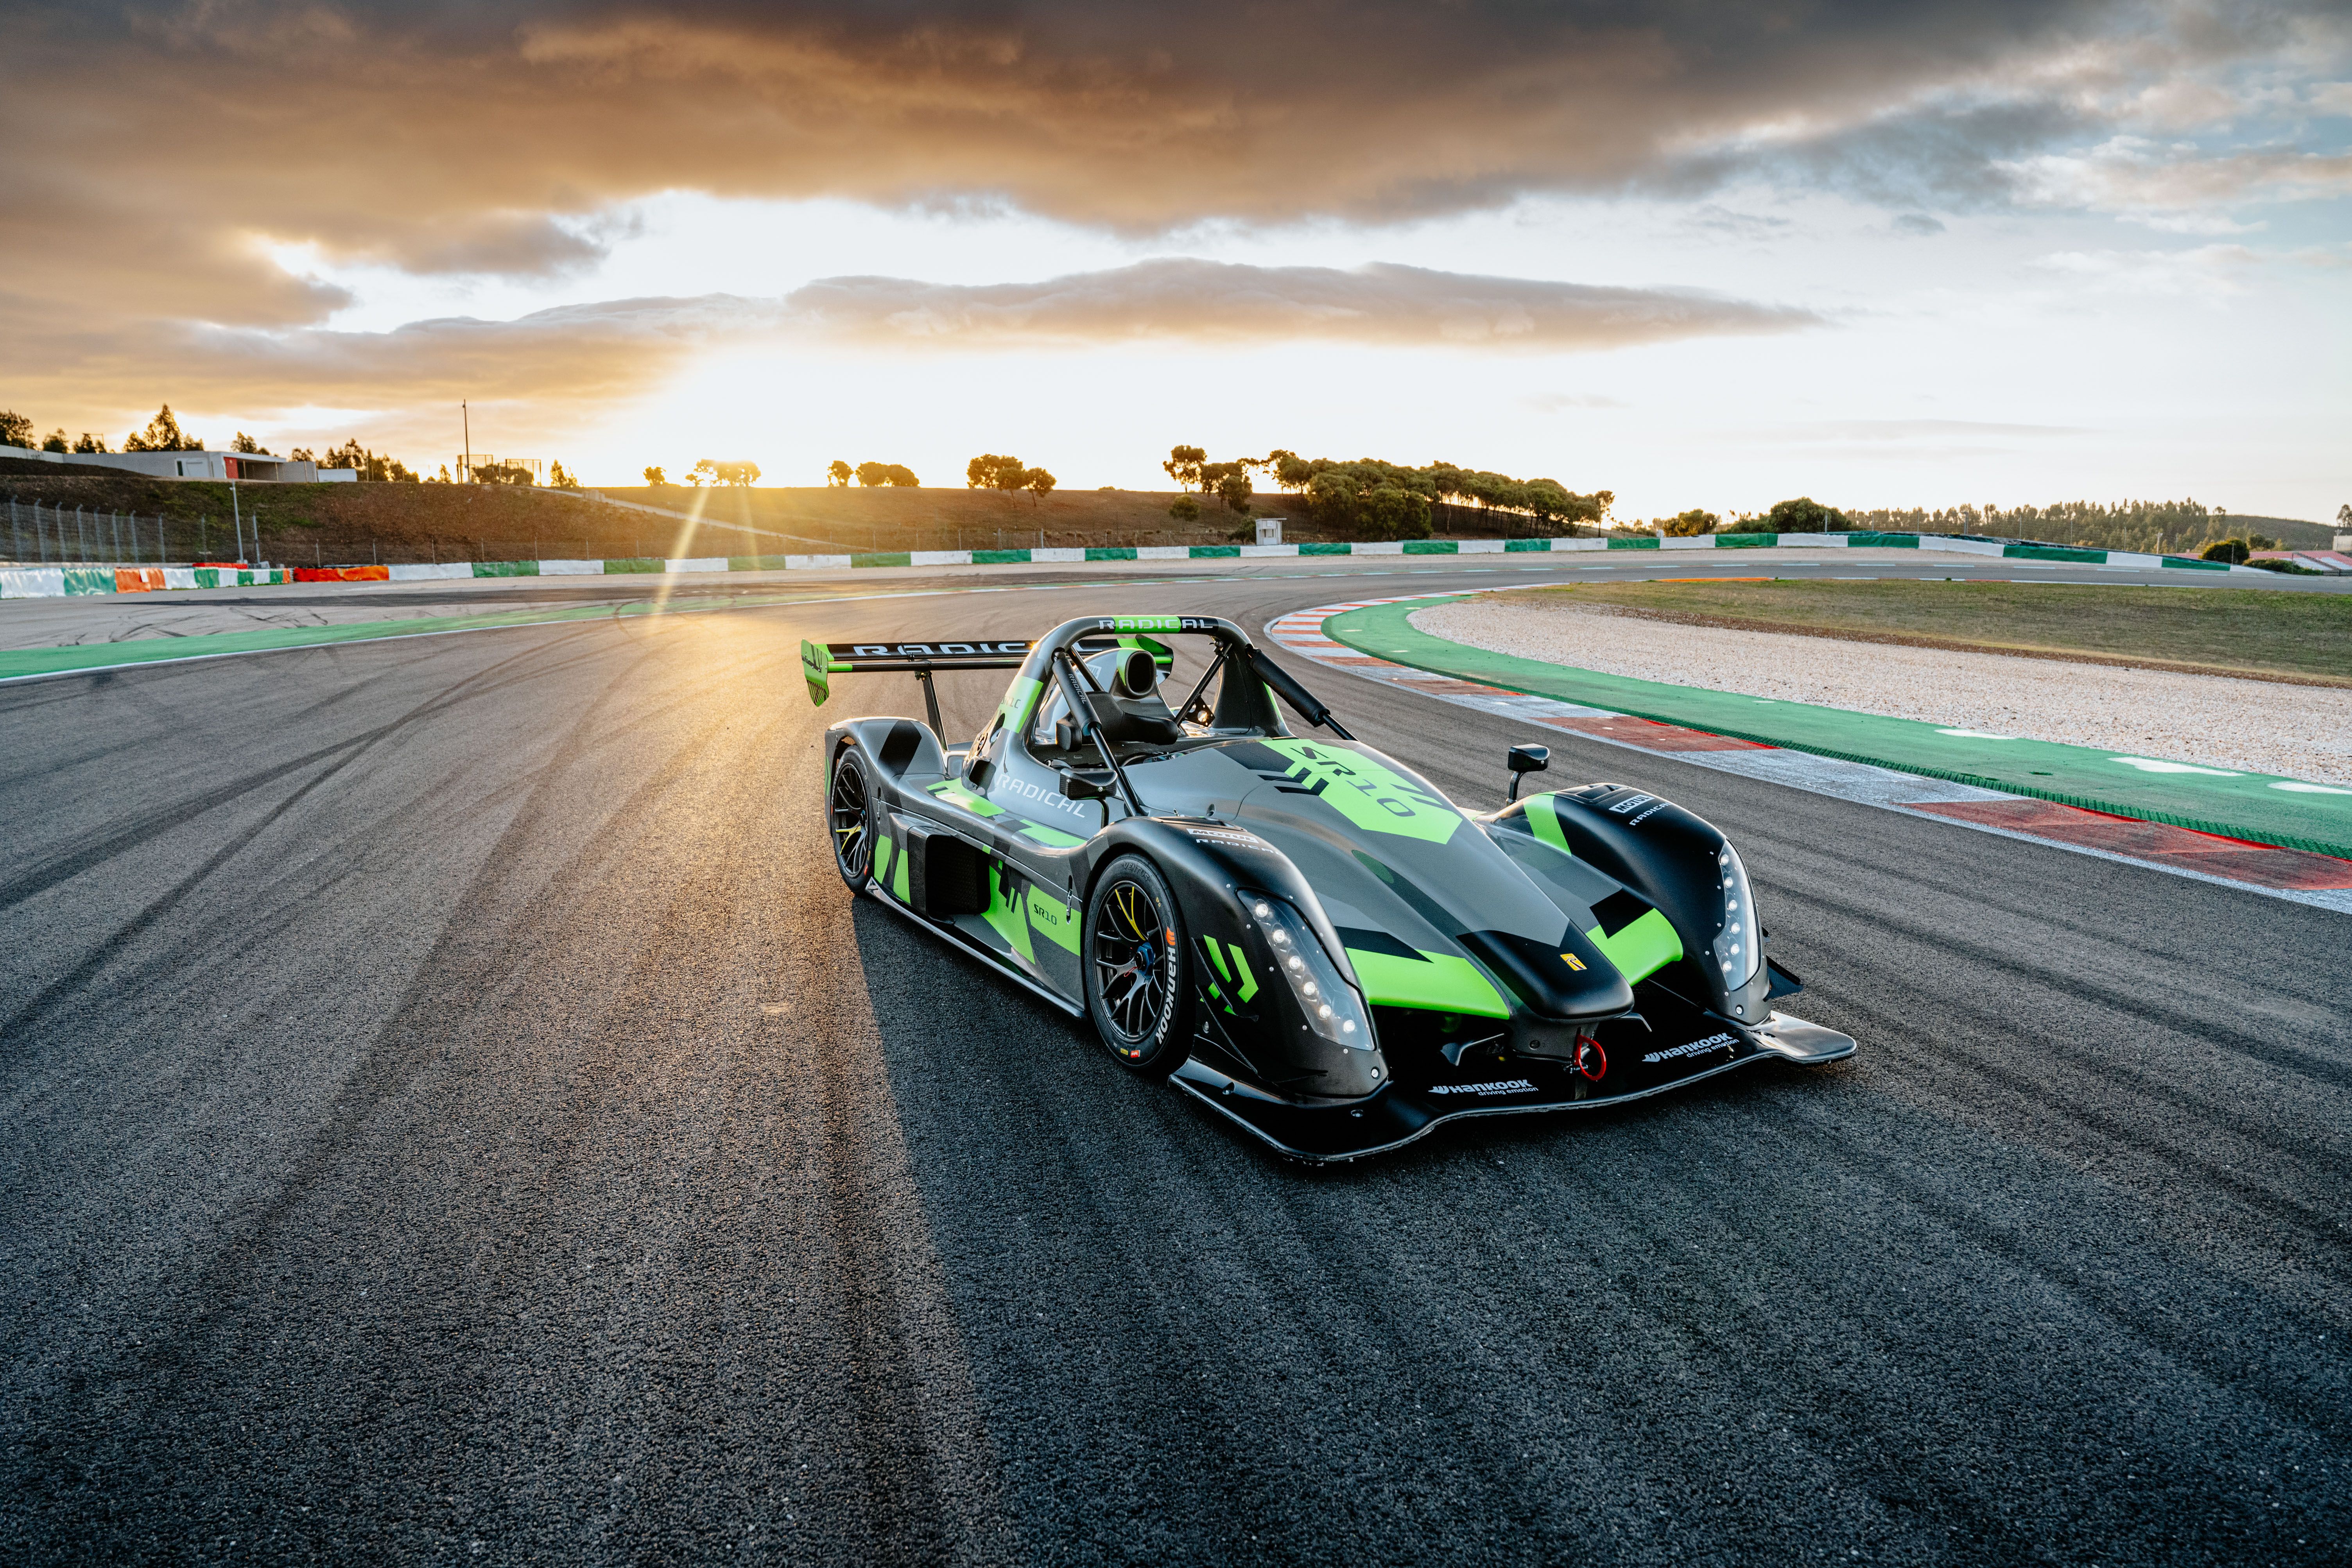 View Photos of the 2022 Radical SR10